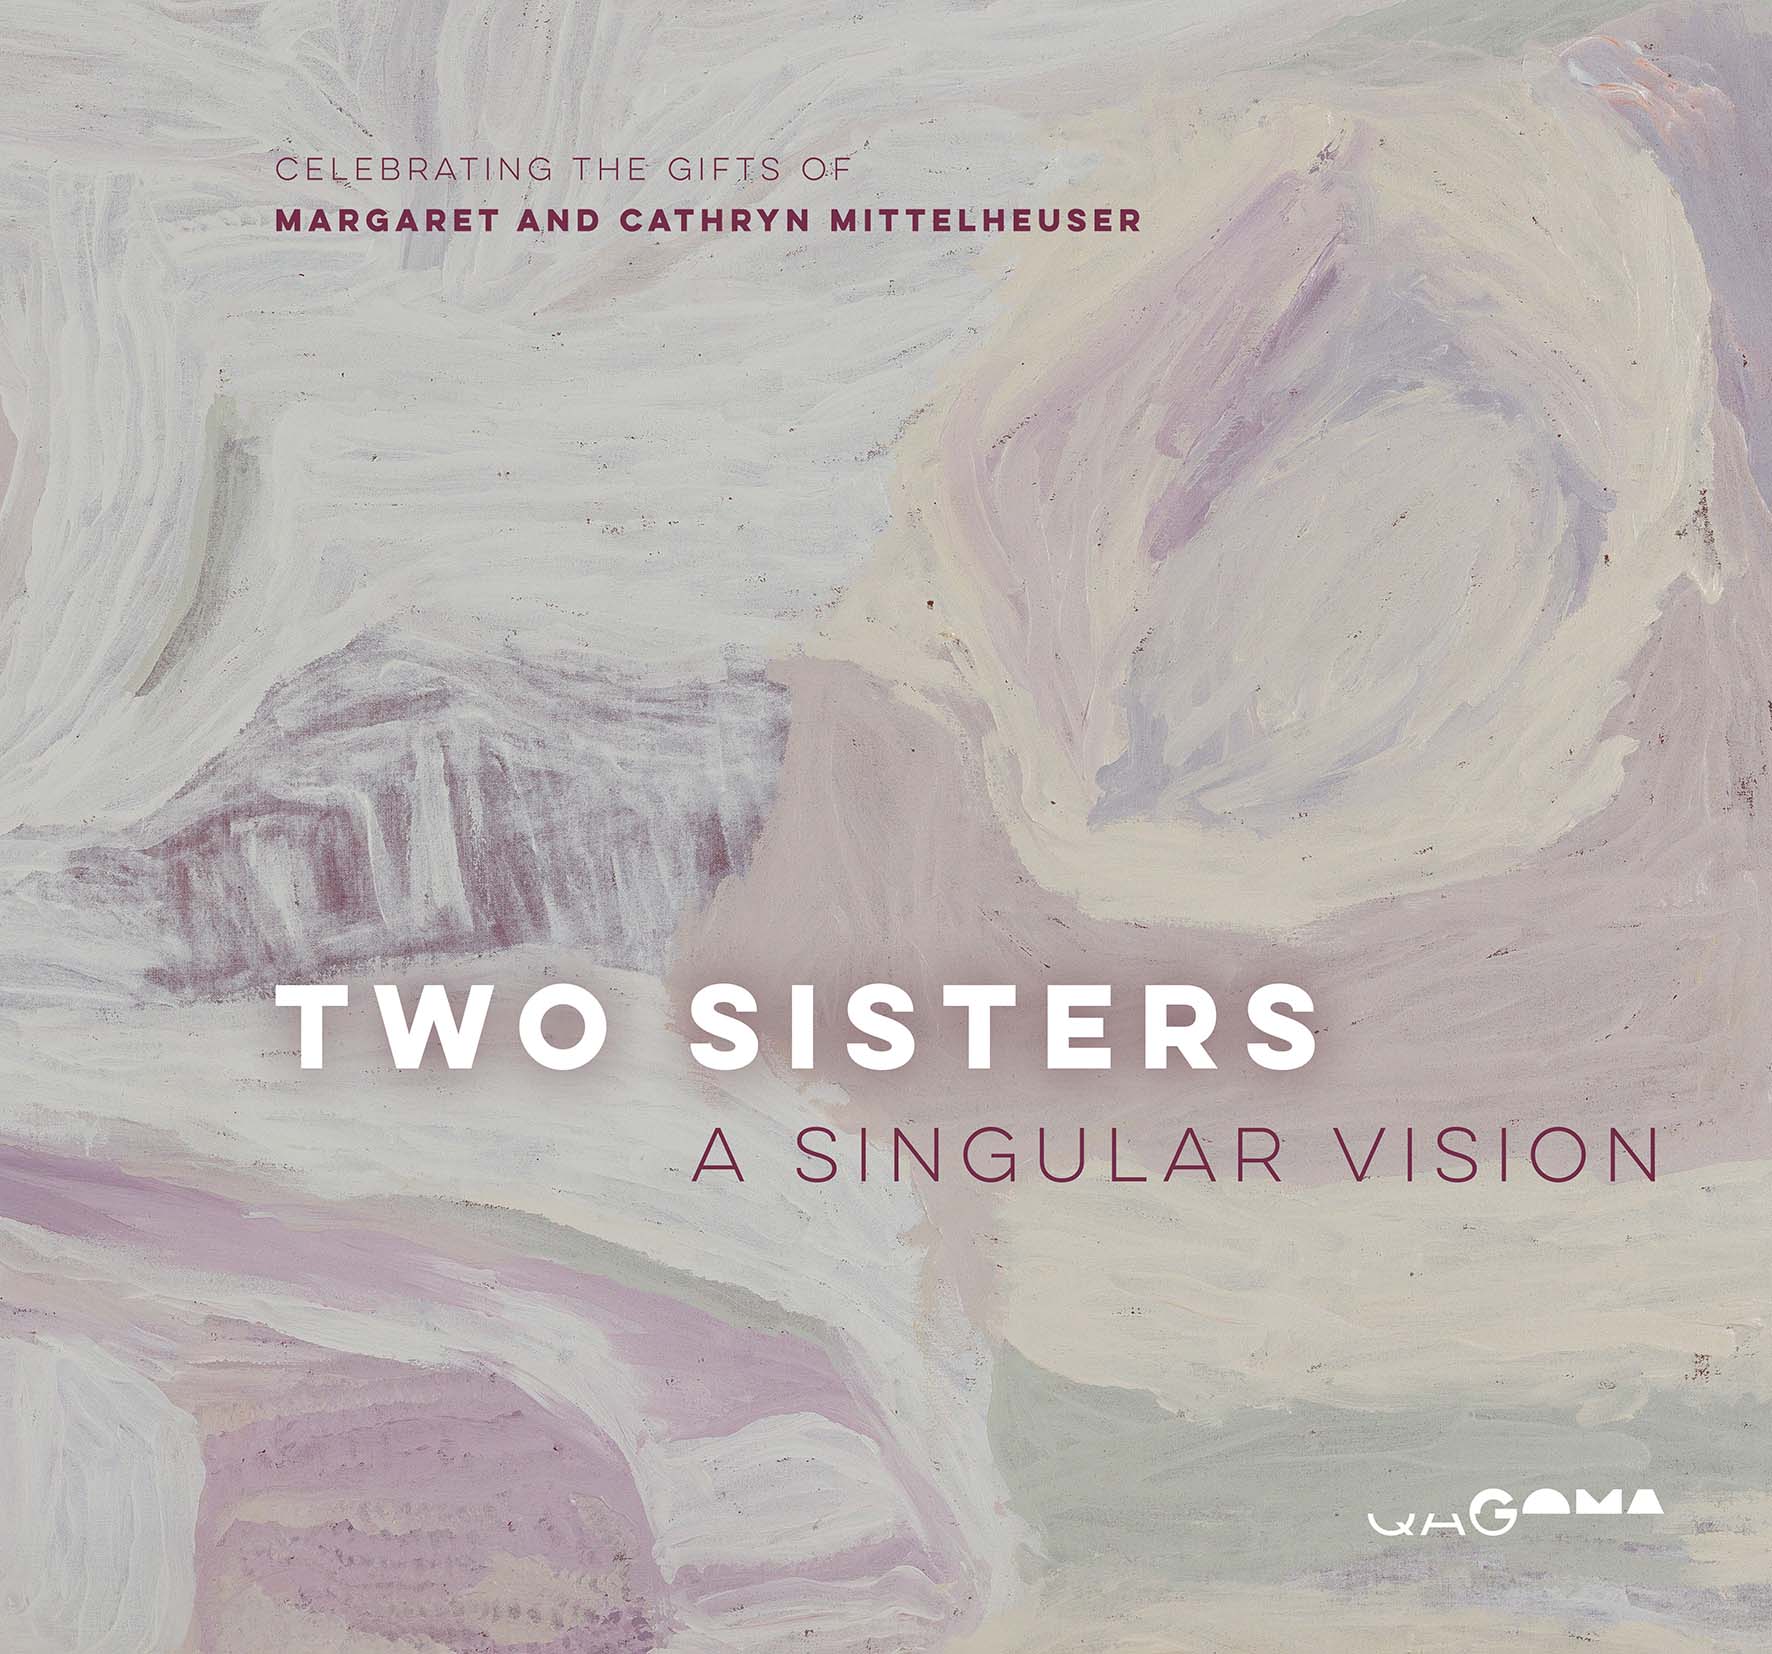 Two Sisters - A Singular Vision: Celebrating the Gifts of Margaret and Cathryn Mittelheuser